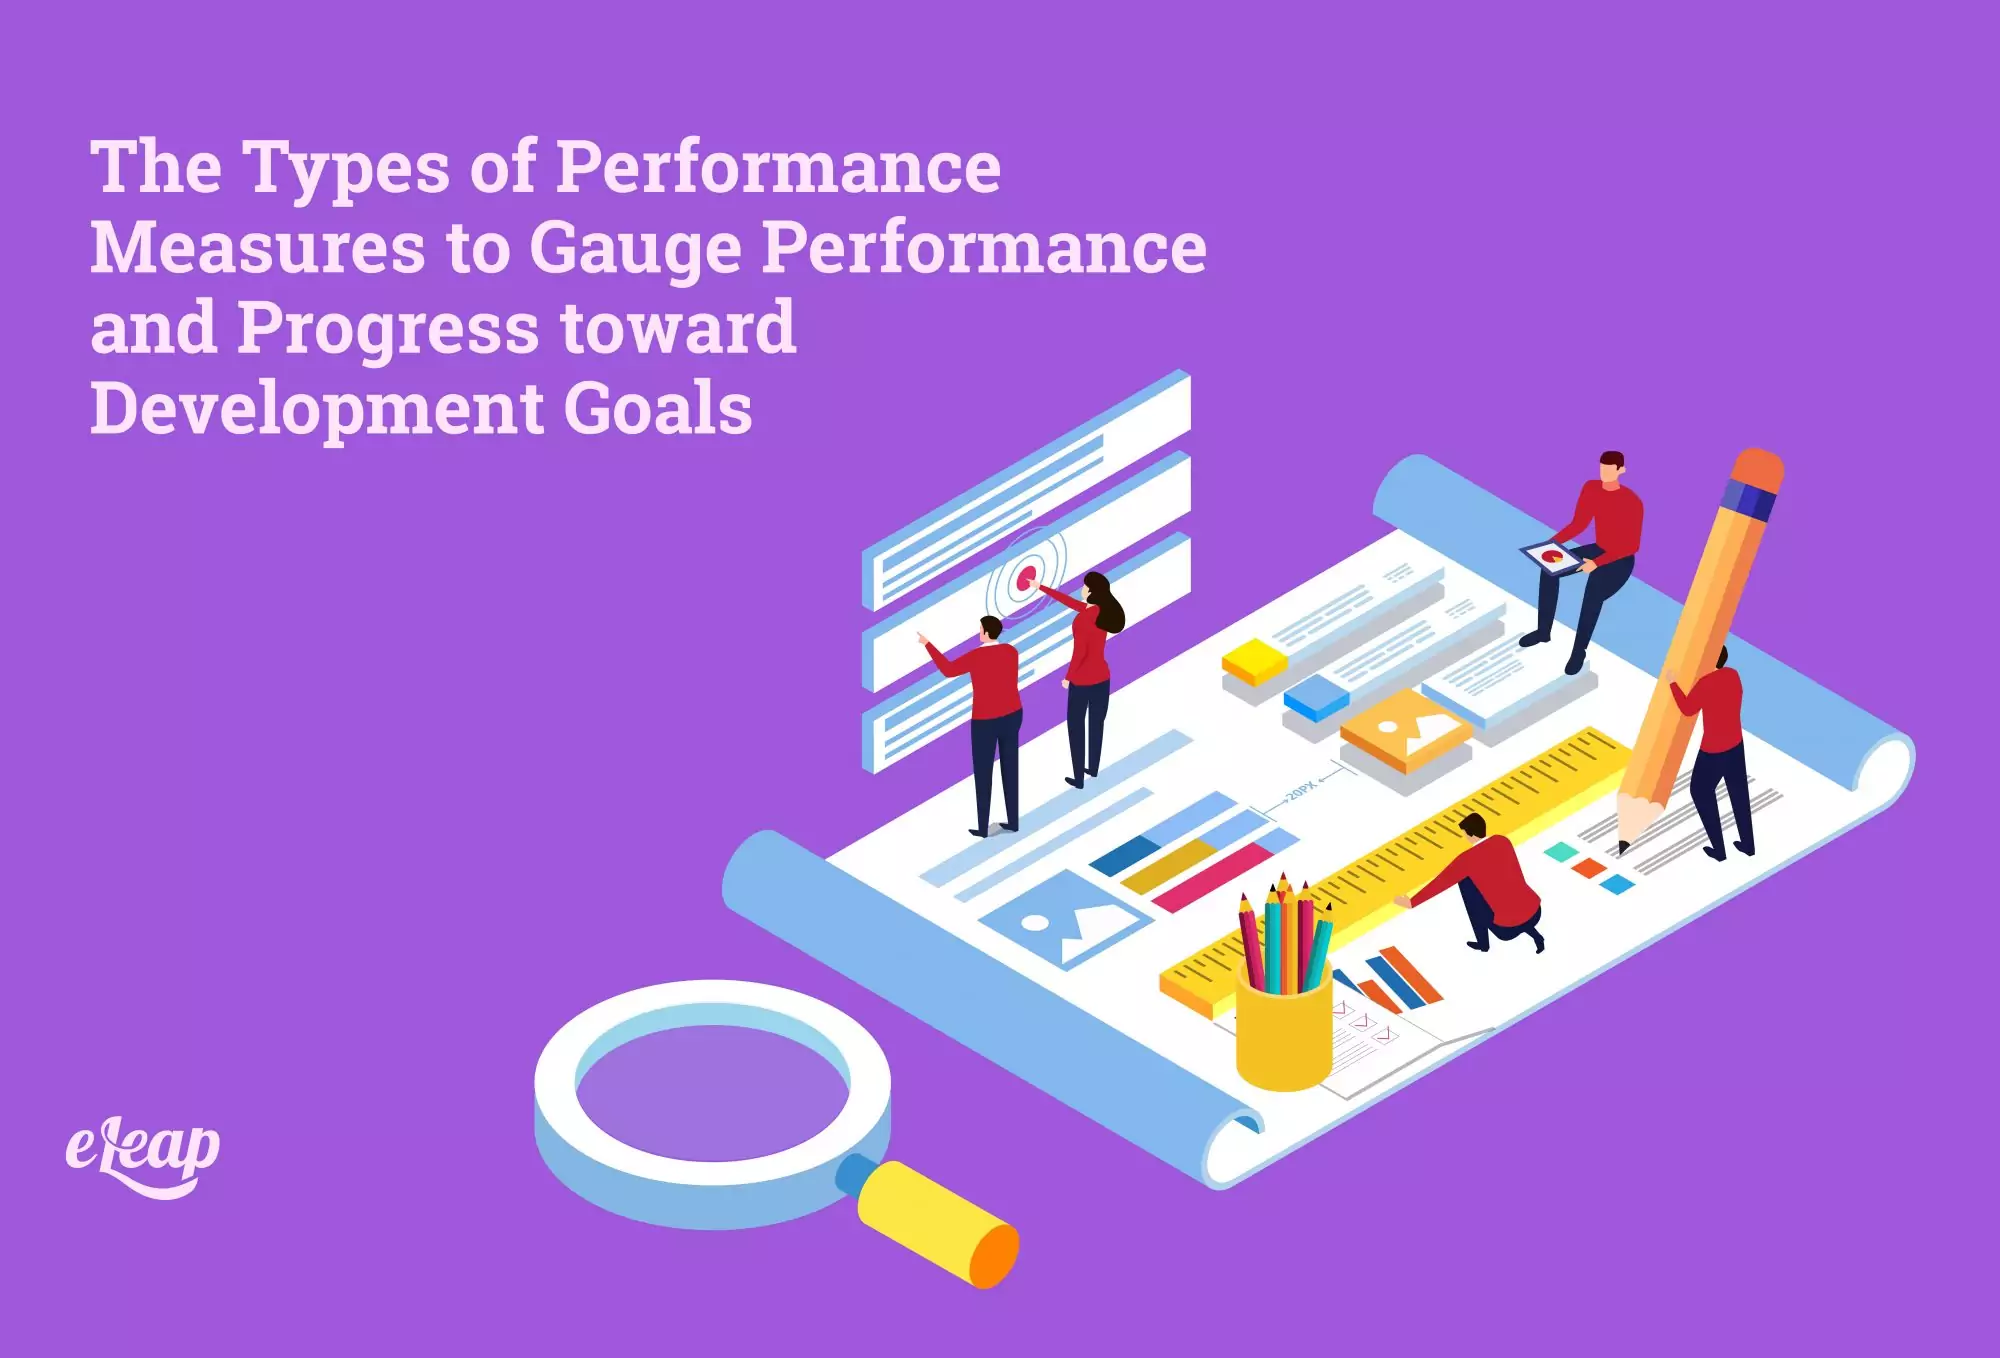 The Types of Performance Measures to Gauge Performance and Progress toward Development Goals